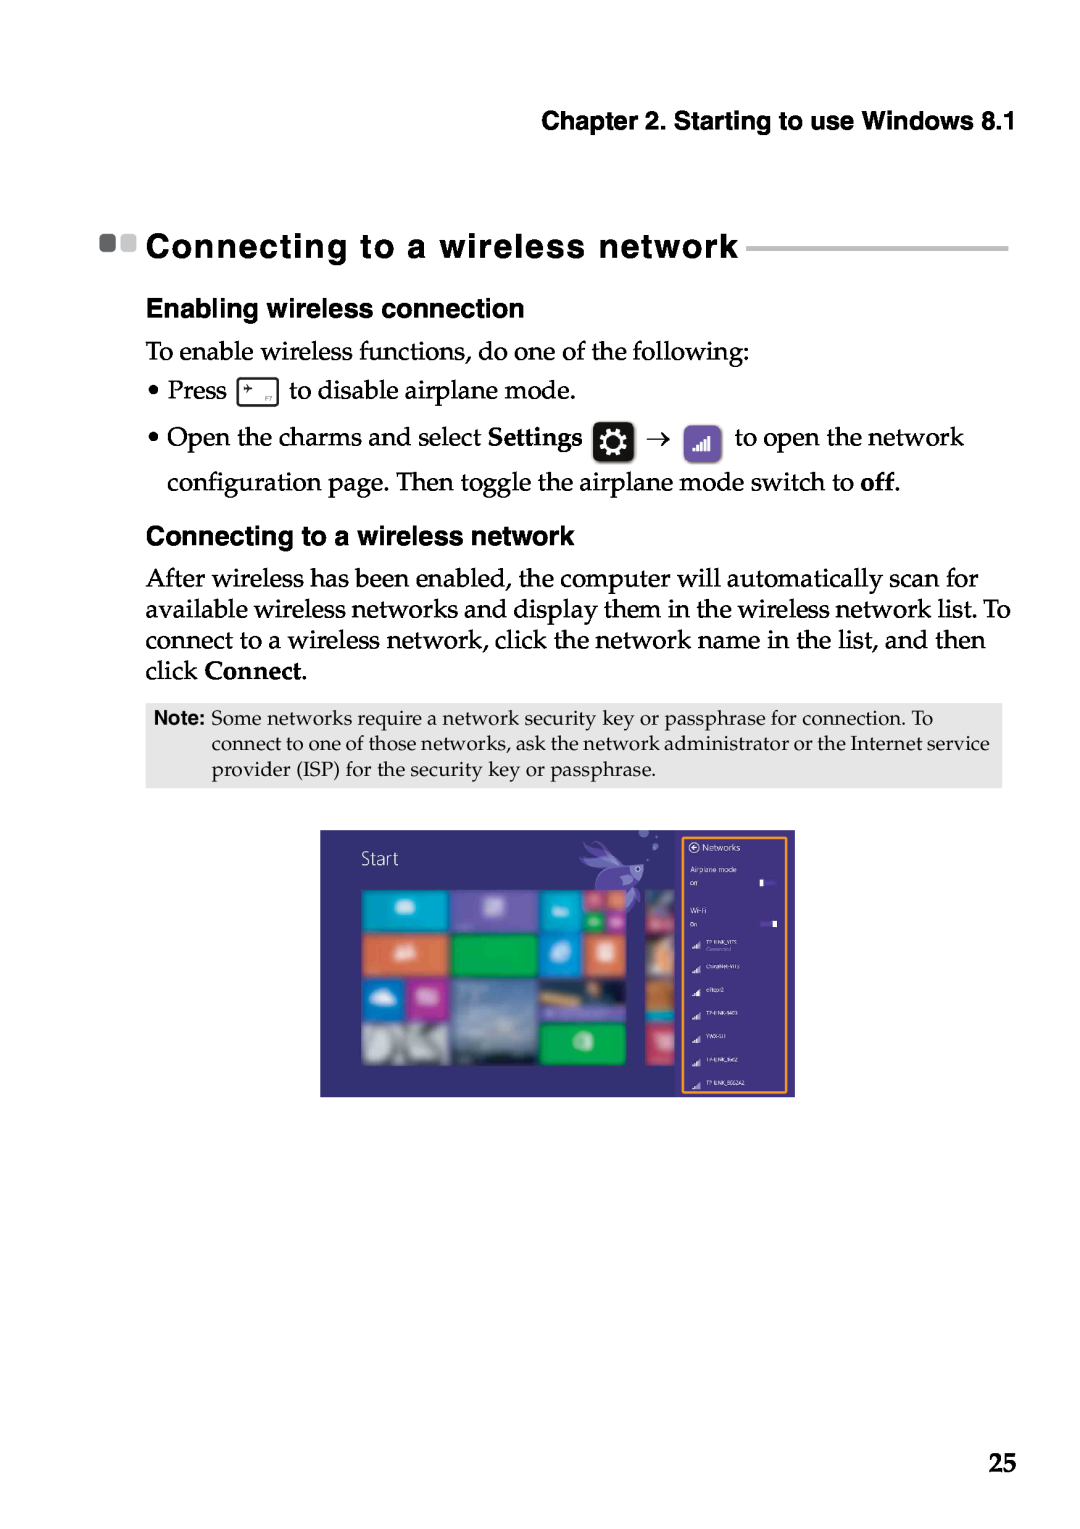 Lenovo 59373026, 59373006 manual Connecting to a wireless network, Enabling wireless connection, Starting to use Windows 